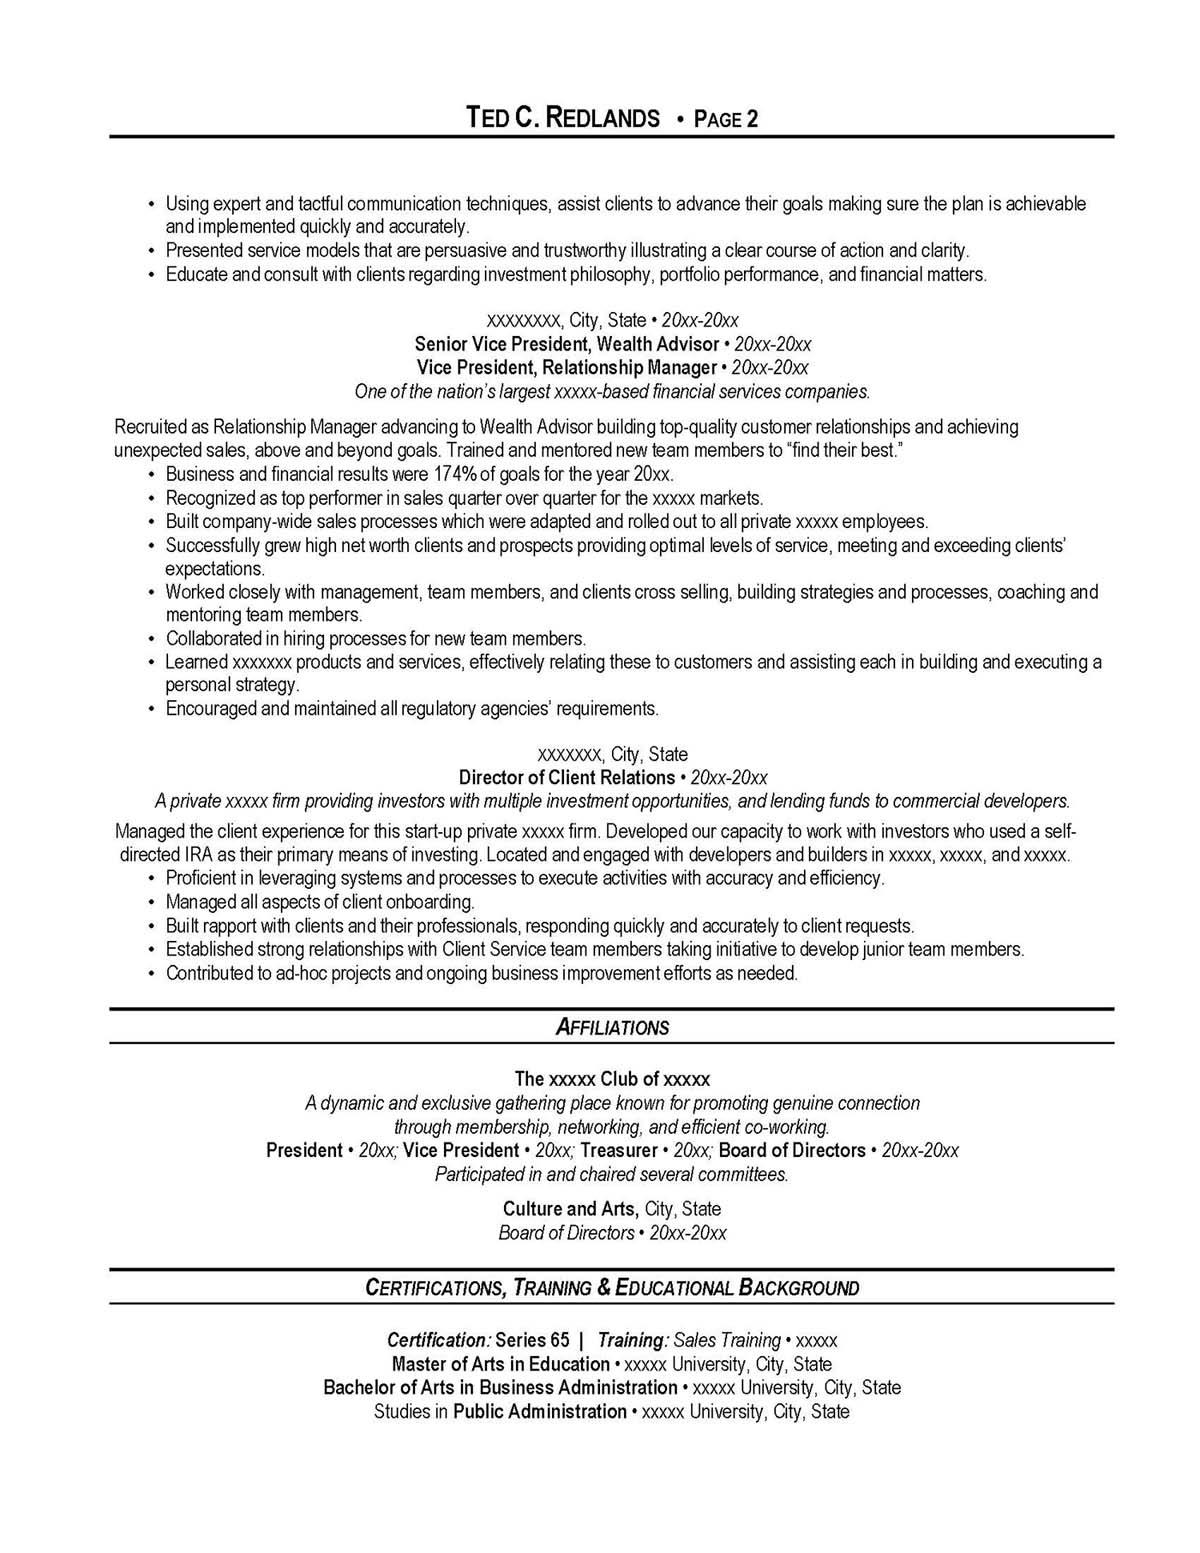 Sample resume: Wealth Management, Mid Experience, Combination